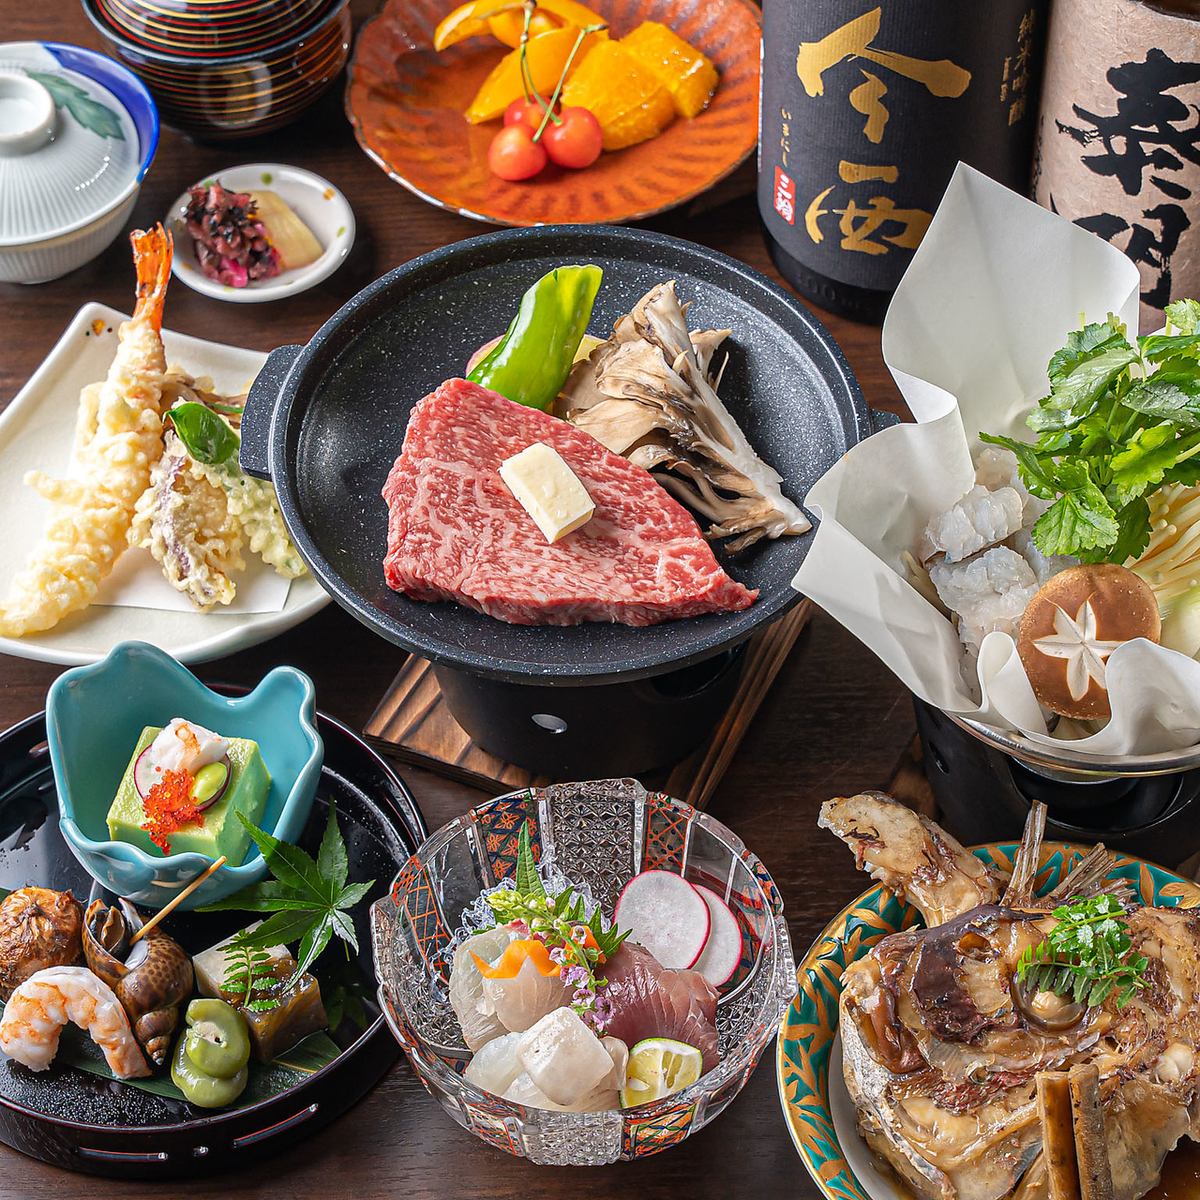 You can enjoy authentic Japanese food that is one rank higher.